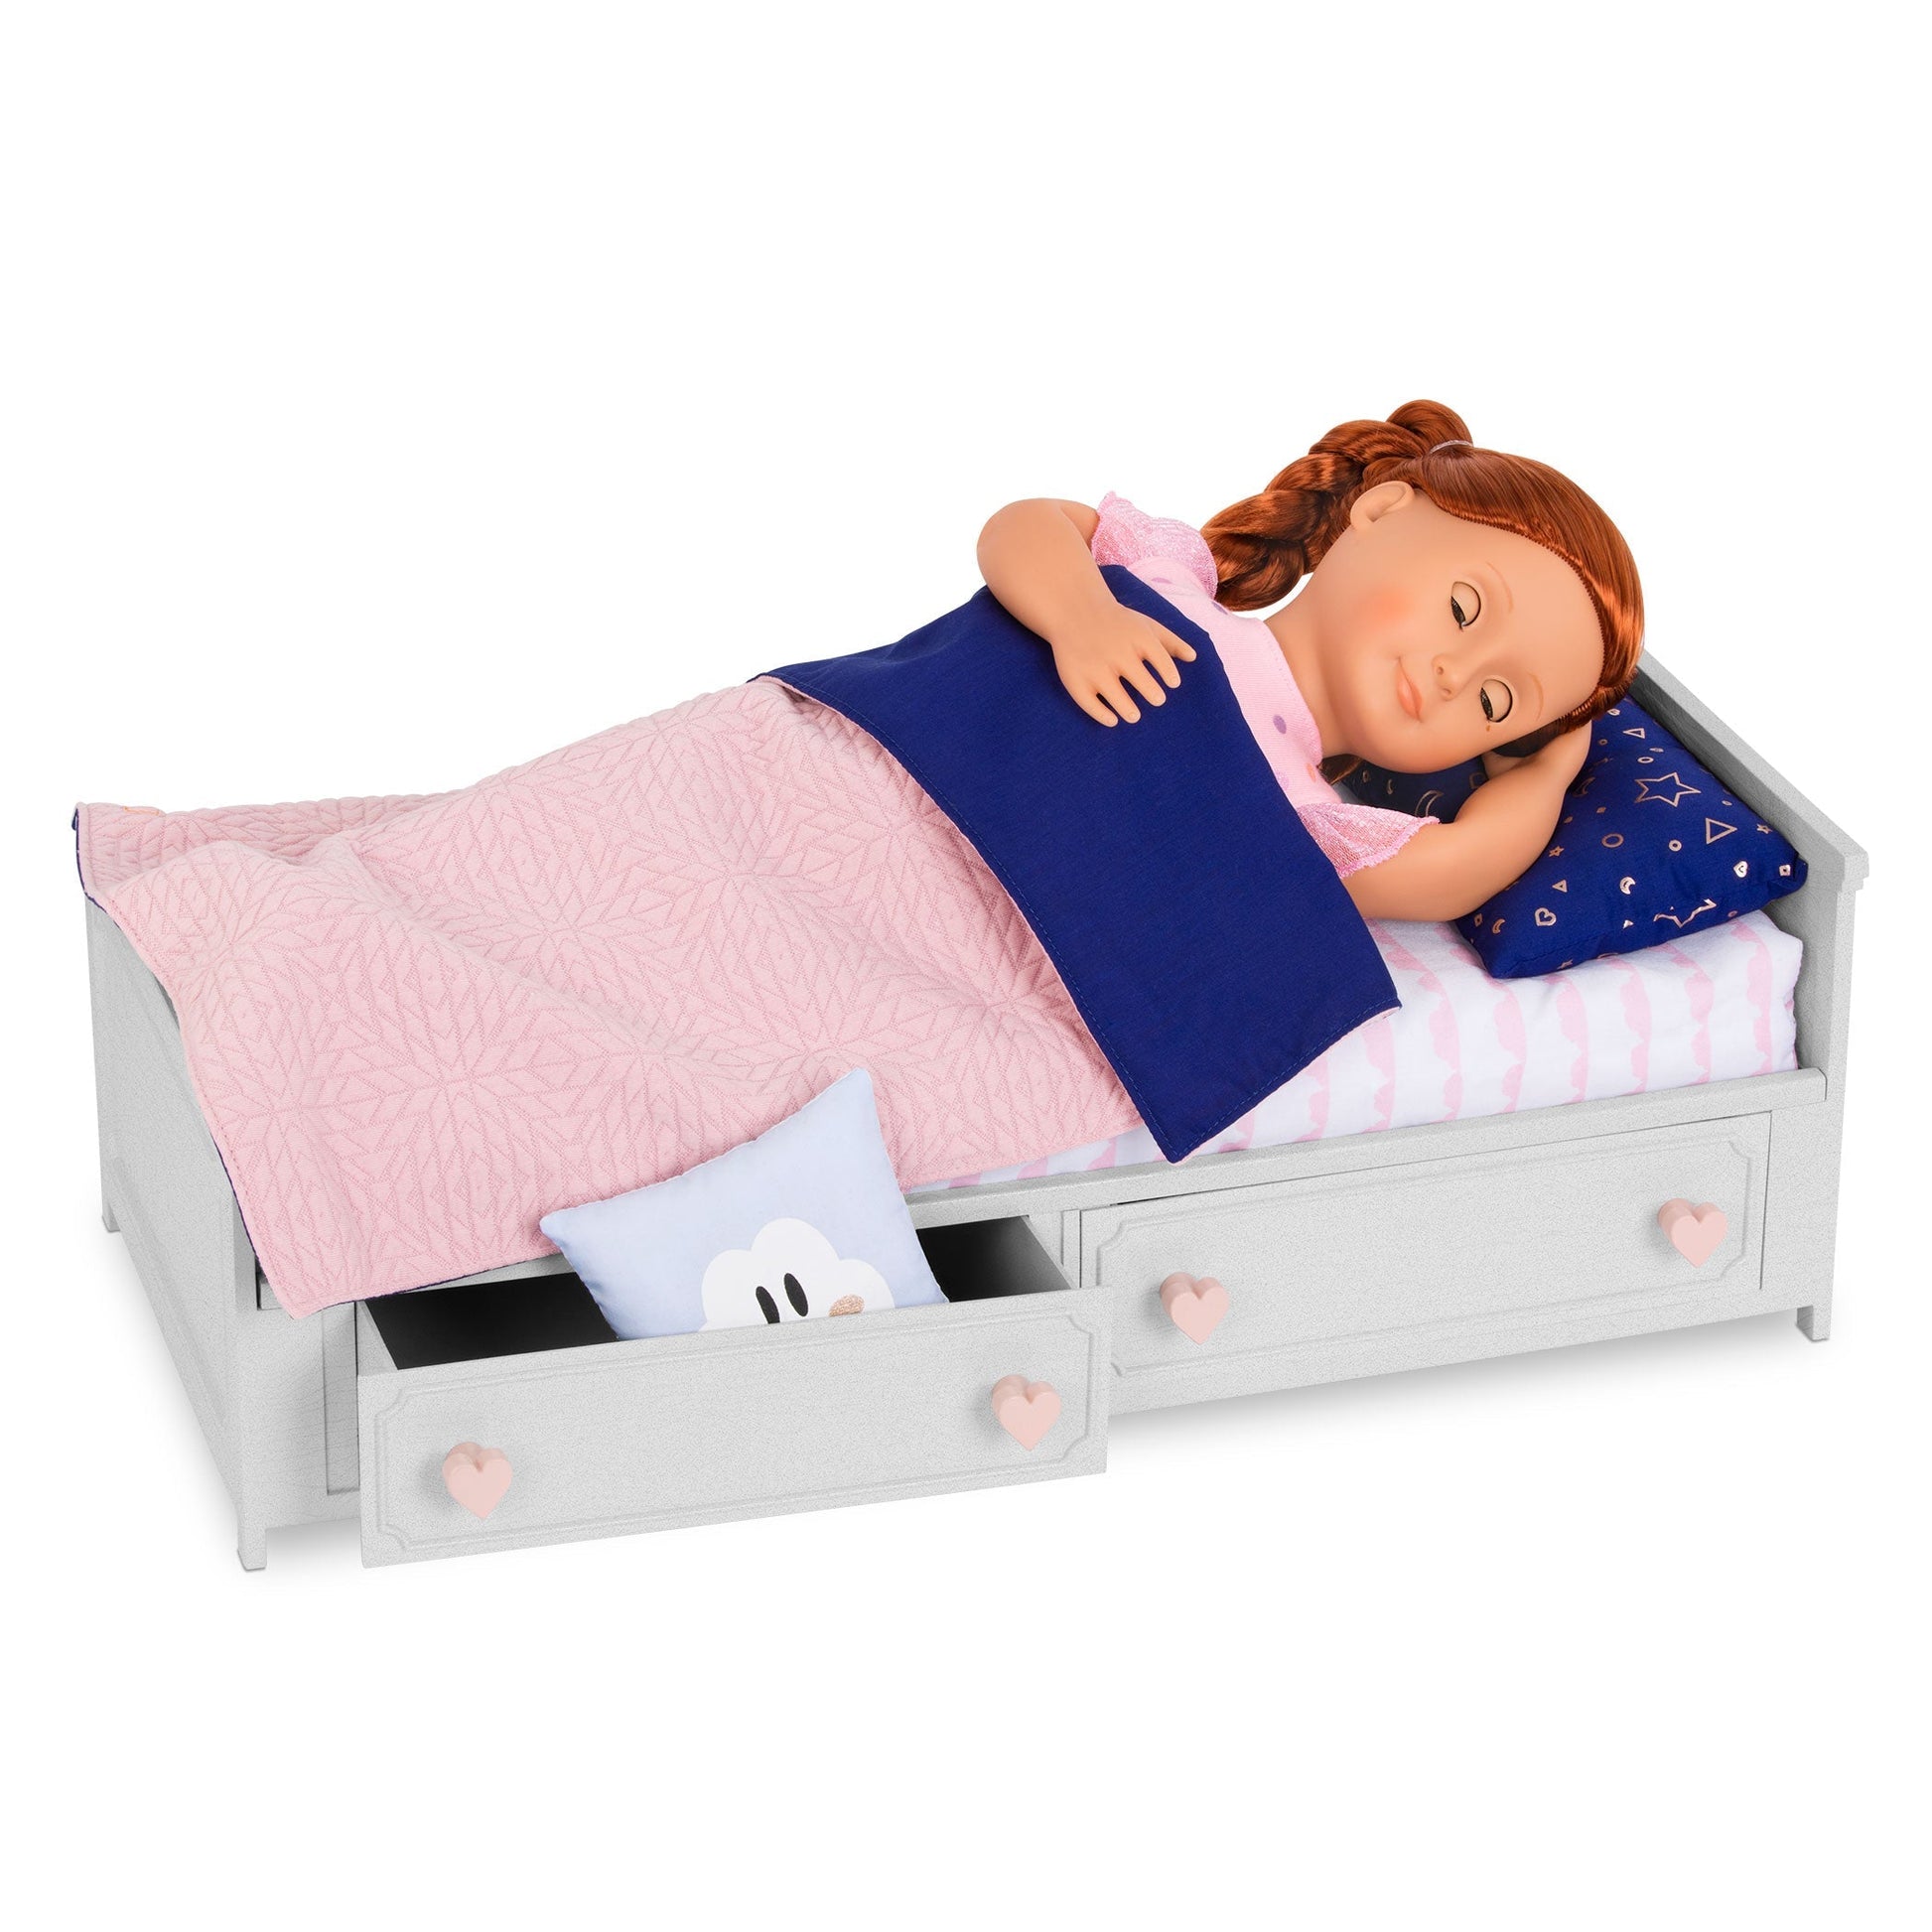 Our Generation Accessory - Starry Slumbers Platform Bed The Toy Wagon